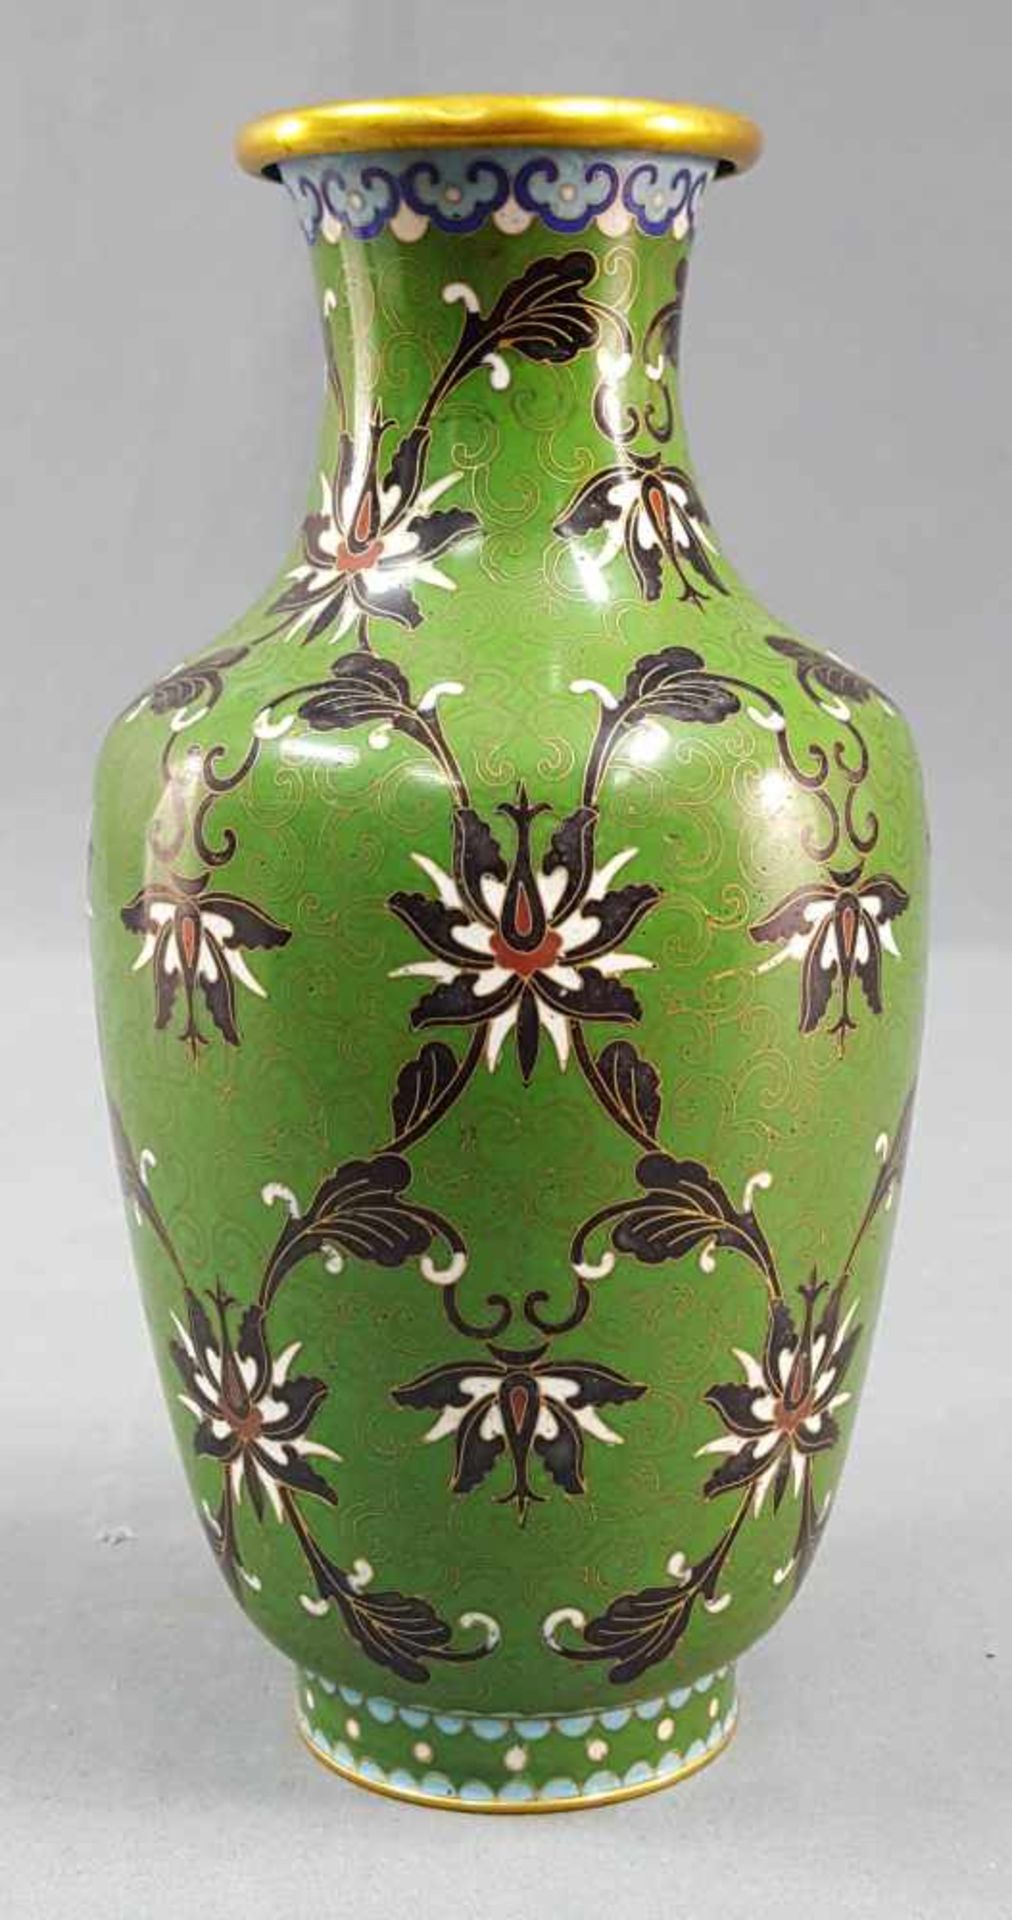 Green Cloisonne vase. Proably China old, around 1920. - Image 2 of 5